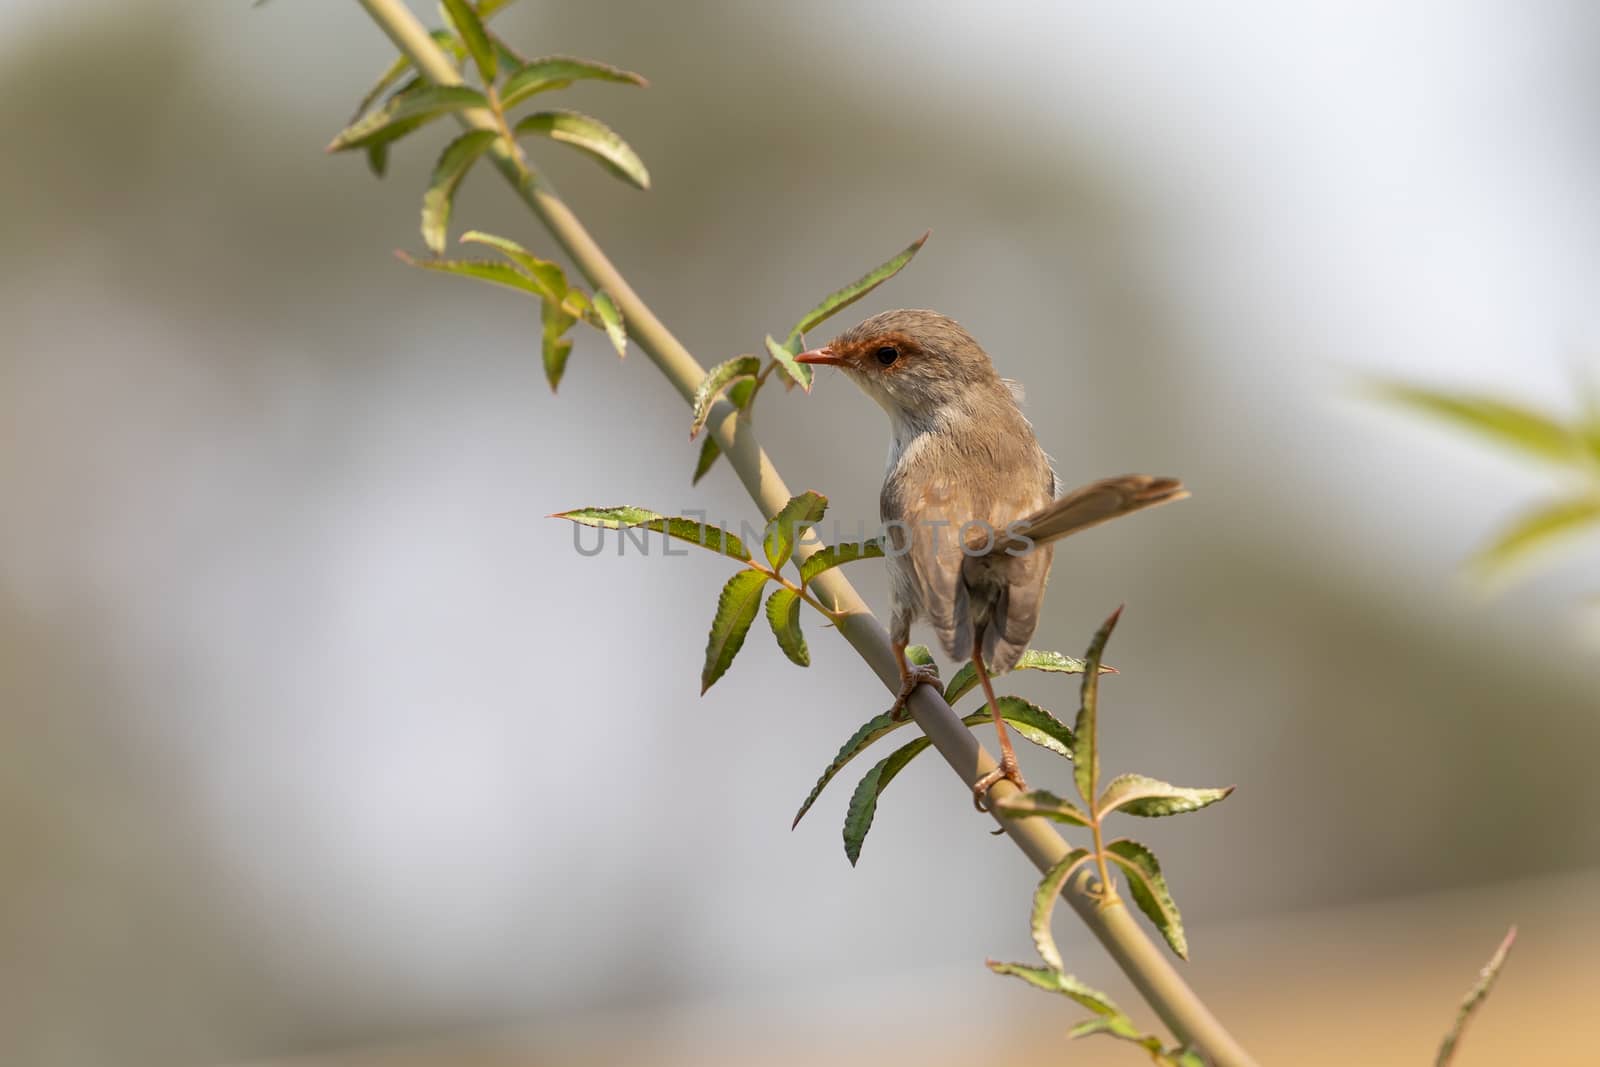 A female Superb Fairy-Wren sitting on a green branch in Australia by WittkePhotos